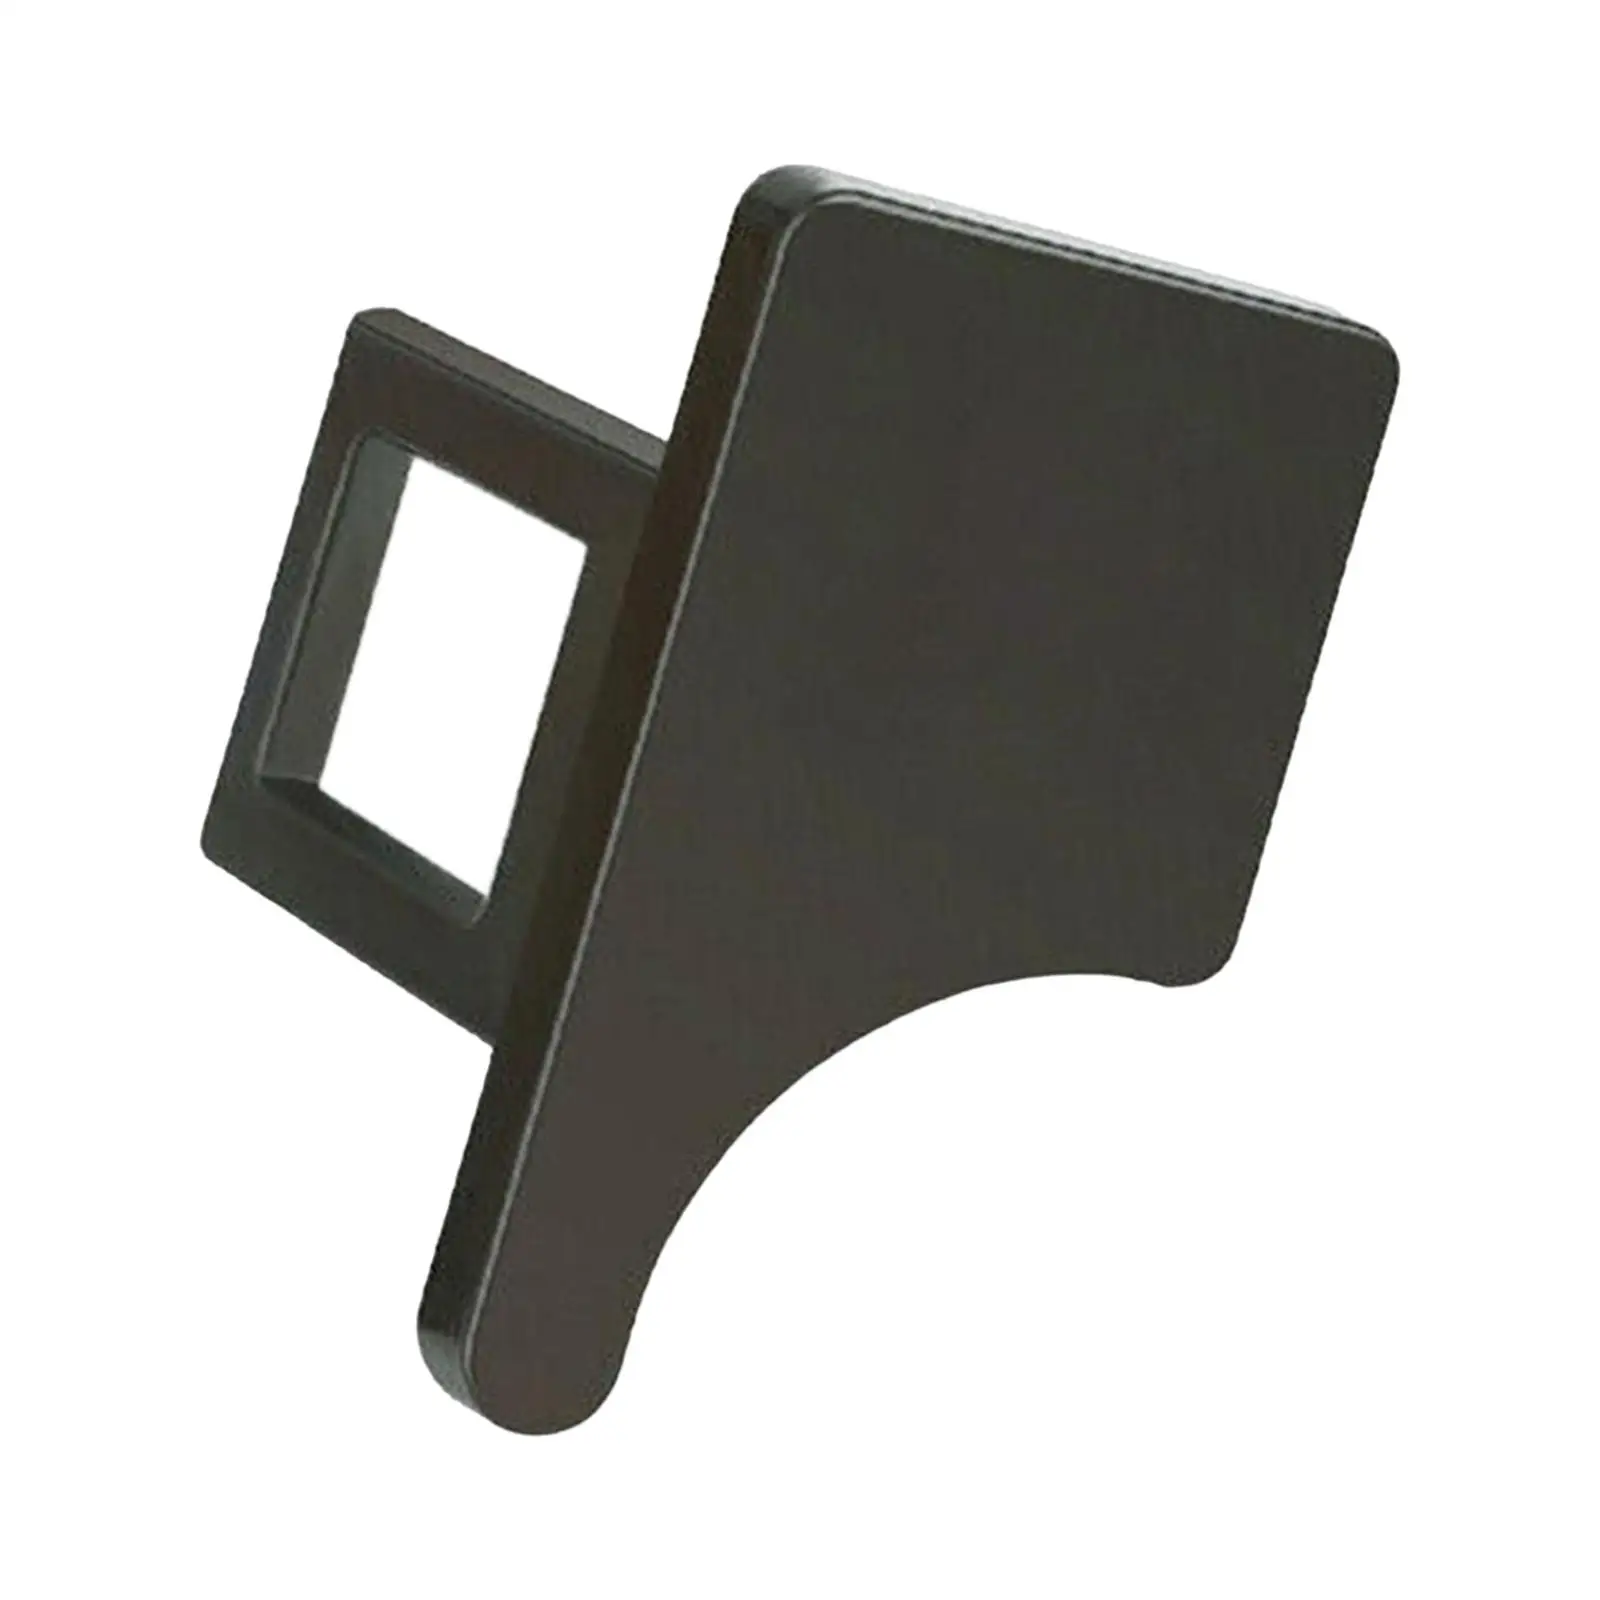 Car Seat Safety Belt Buckle Clip Metal Insert Card Replaces Hidden Seat Belt Buckle Clip for Byd Atto 3 Yuan Plus